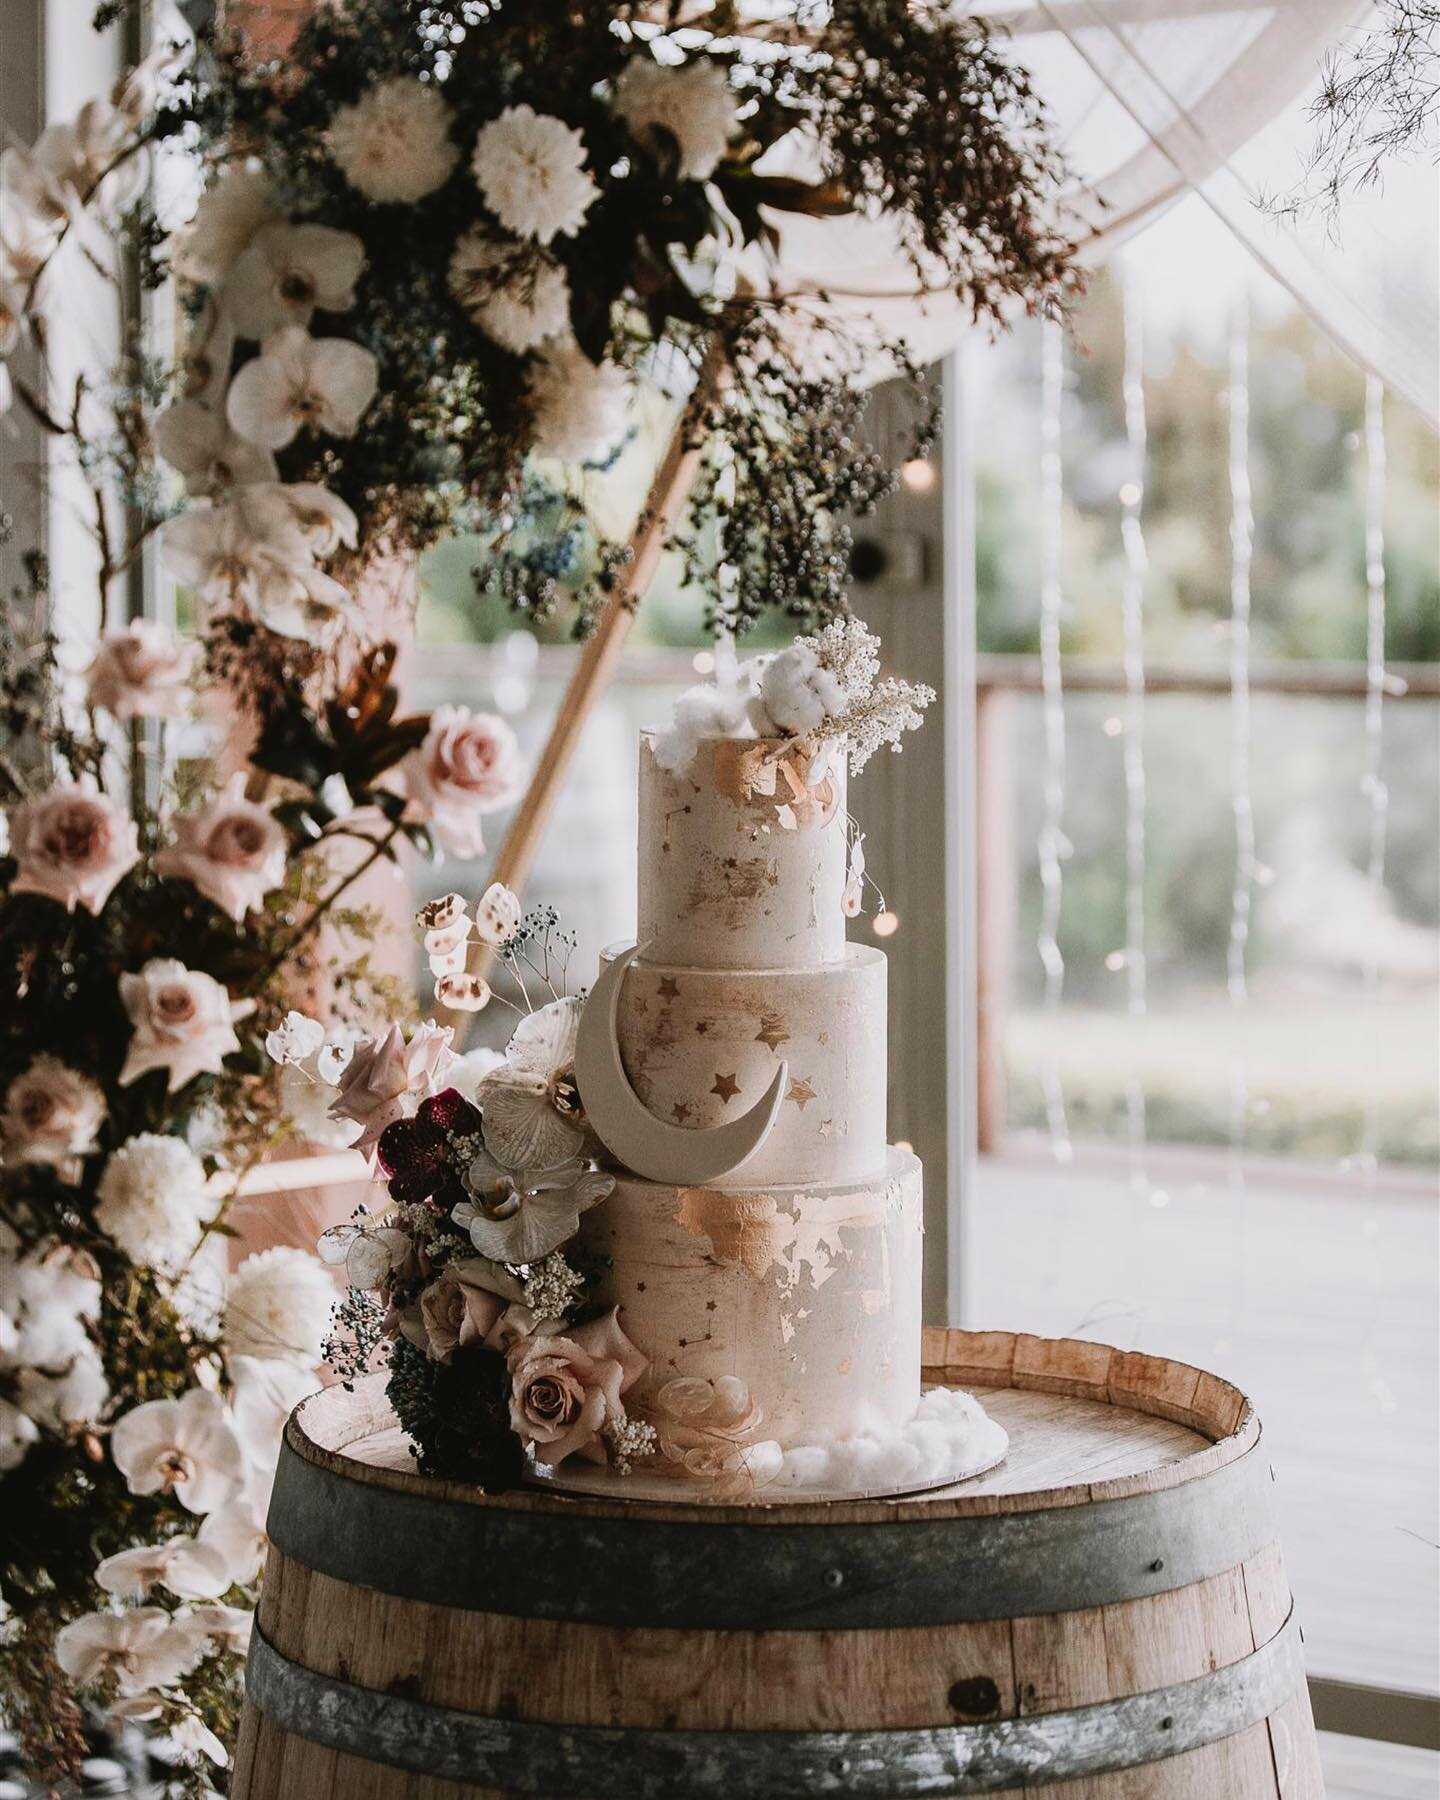 This absolute stunner of a cake creation was so perfectly paired with Bron + Deans &lsquo;sky full of stars&rsquo; thematic wedding, I couldn&rsquo;t stop taking photos - the intricacy and attention to detail is next level 😍 credit to cake genius @l